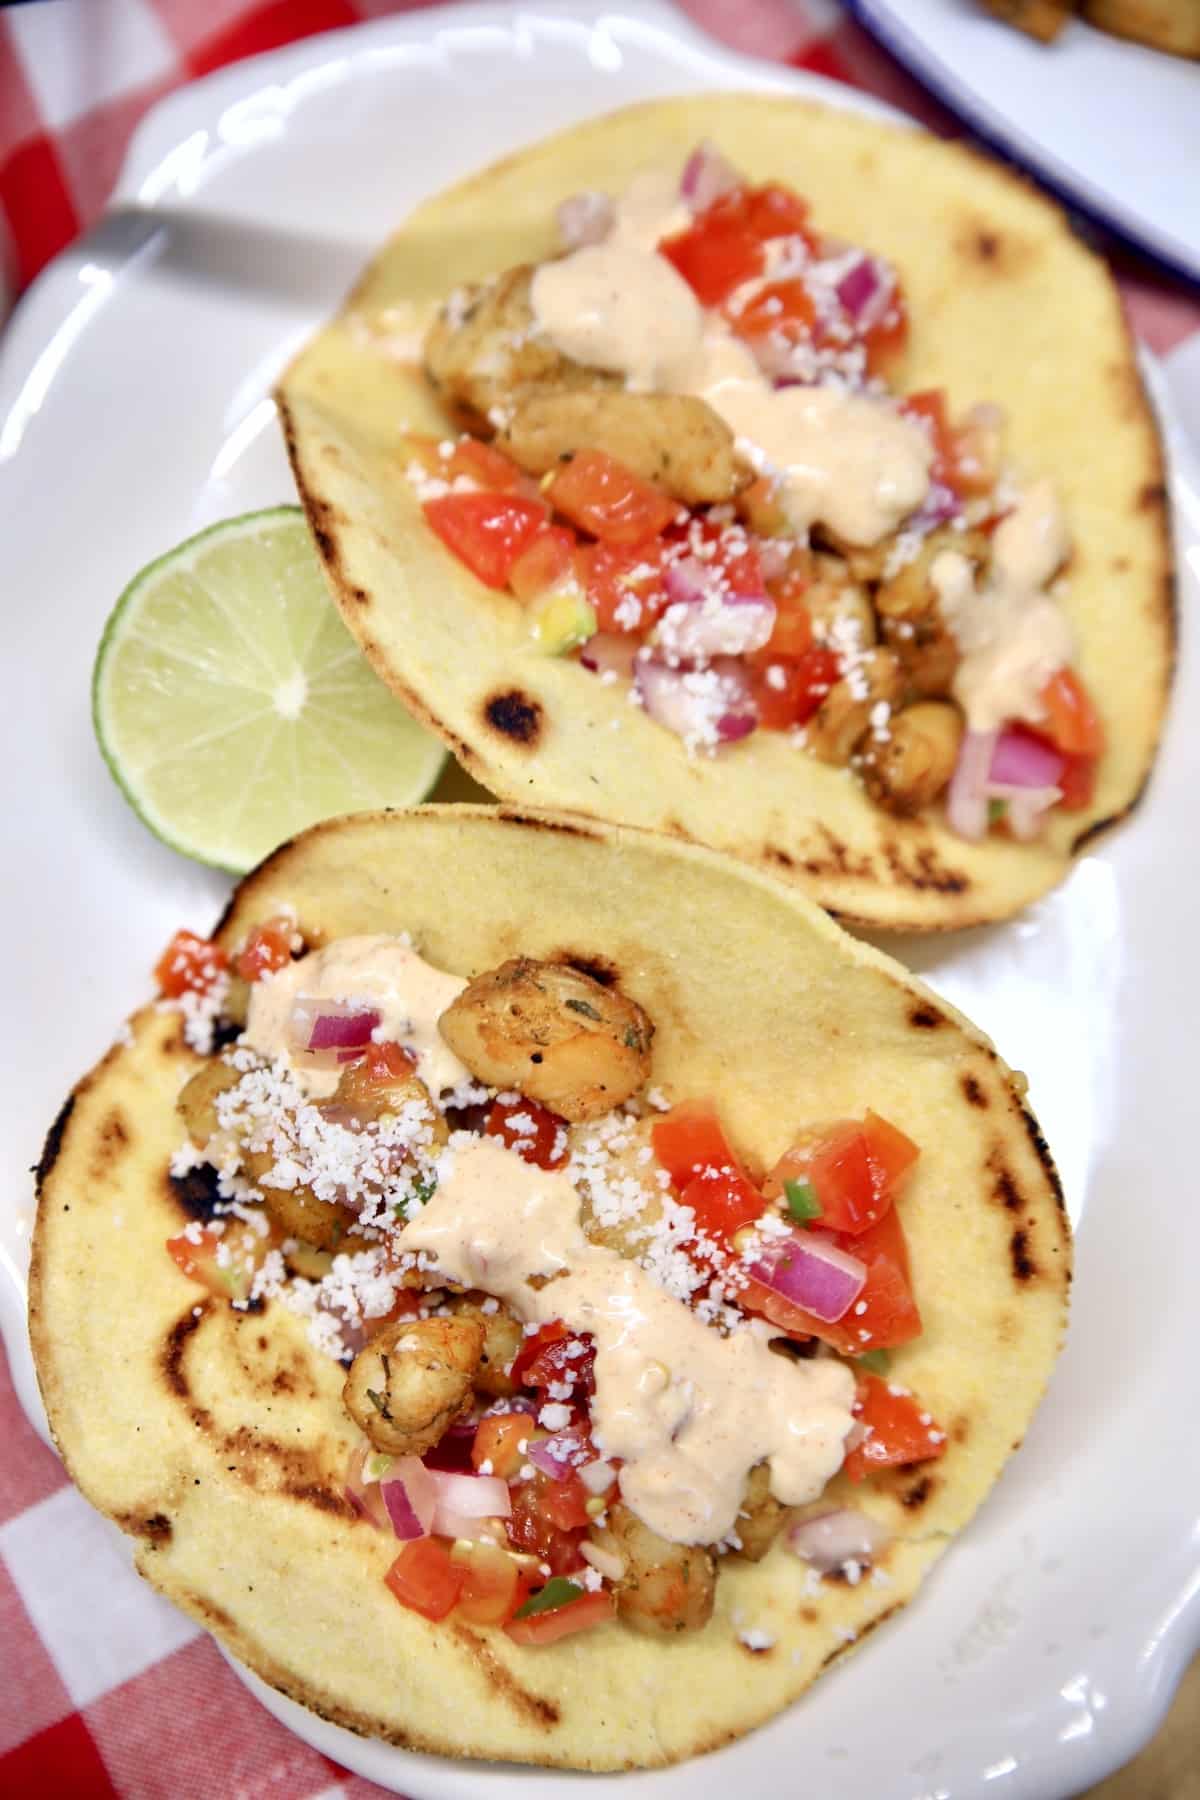 Grilled seafood tacos with taco sauce.